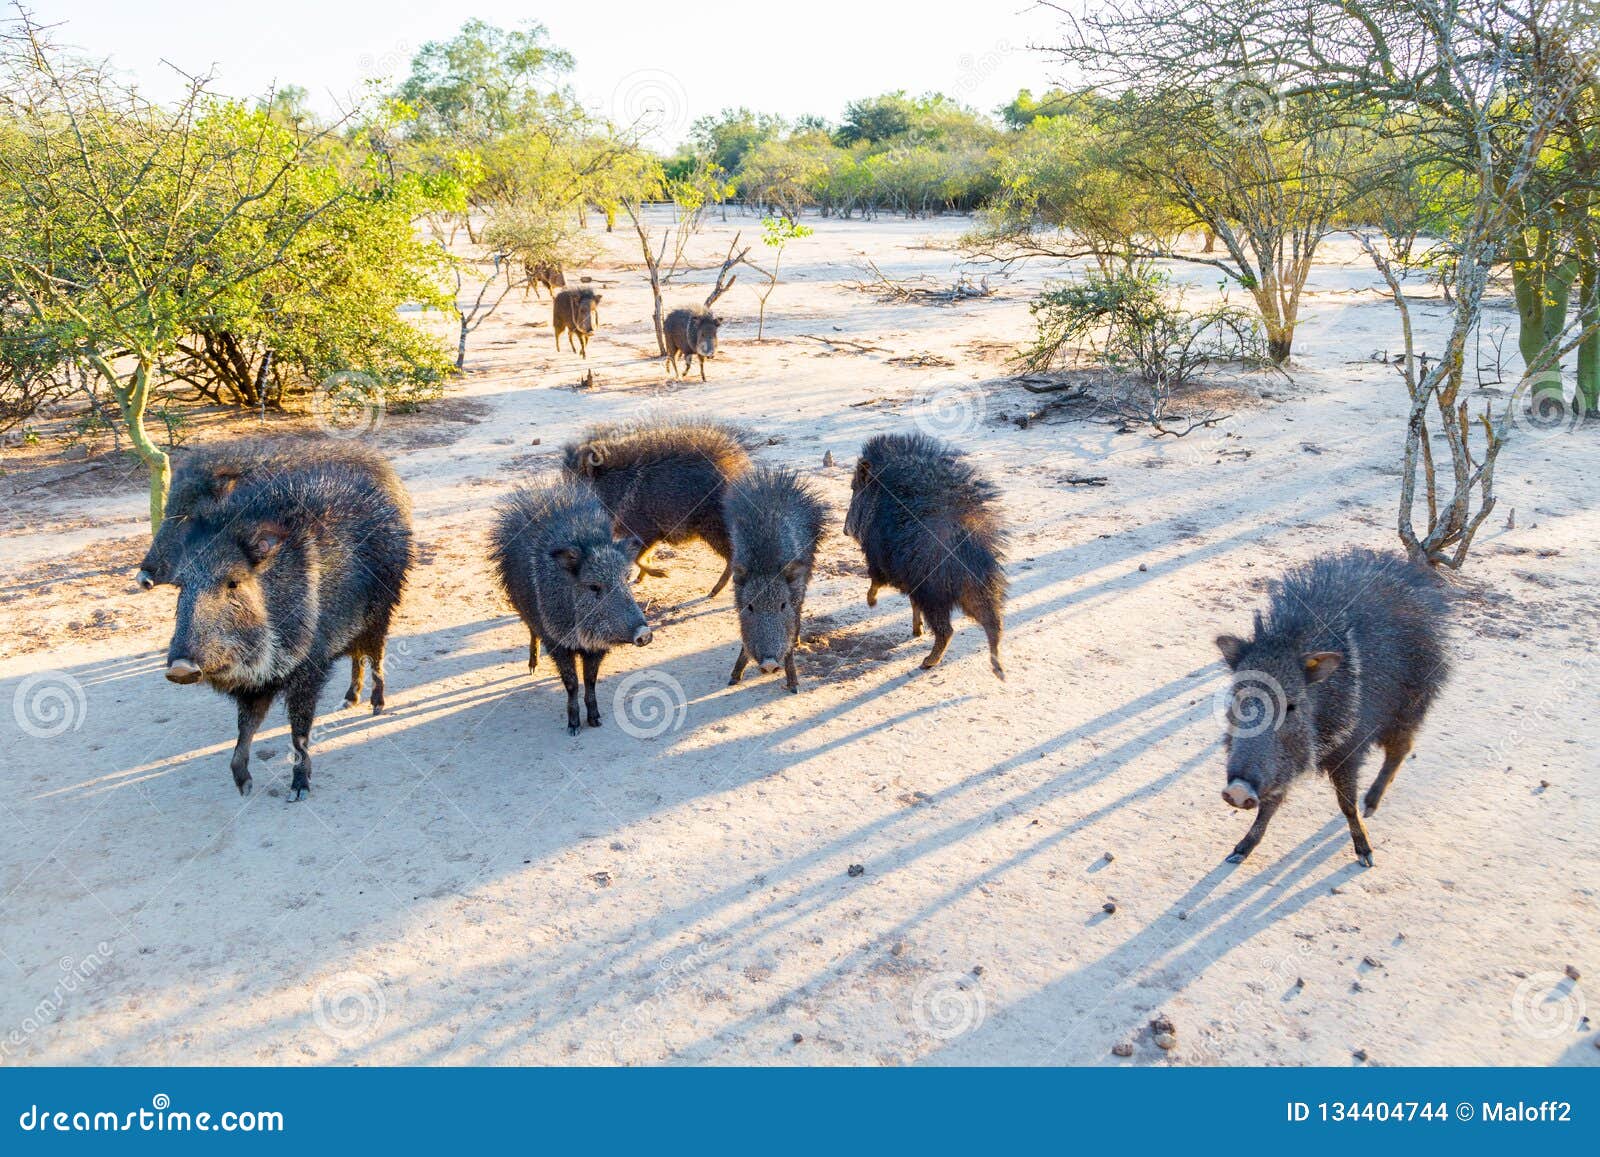 group of wild chacoan peccary, paraguay chaco, gran chaco, paraguay, latin america, south america.